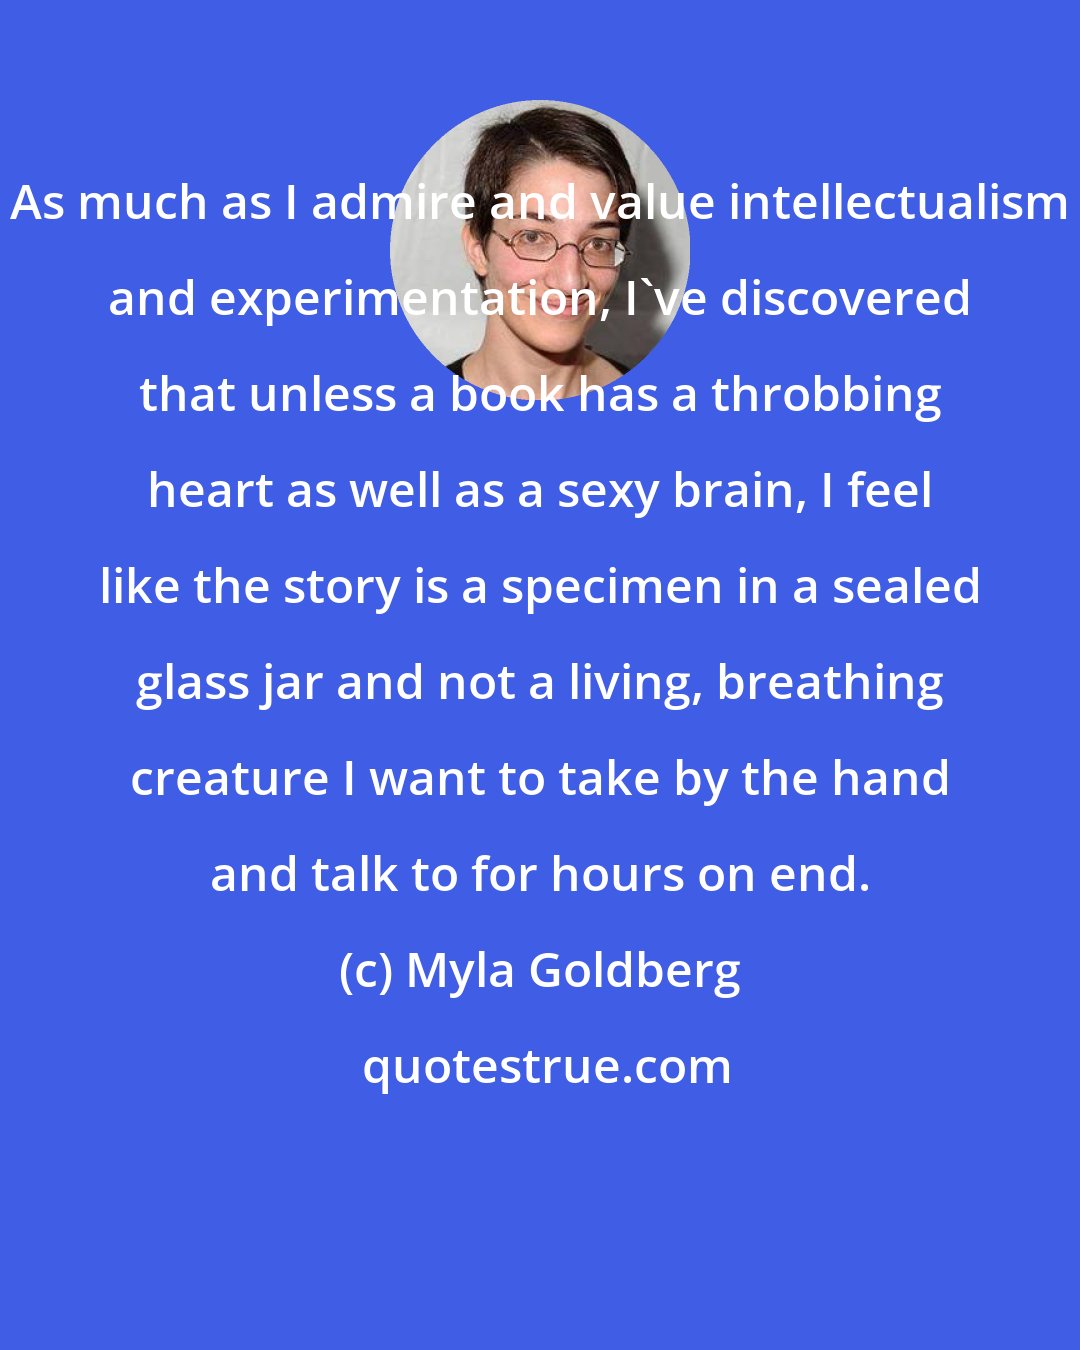 Myla Goldberg: As much as I admire and value intellectualism and experimentation, I've discovered that unless a book has a throbbing heart as well as a sexy brain, I feel like the story is a specimen in a sealed glass jar and not a living, breathing creature I want to take by the hand and talk to for hours on end.